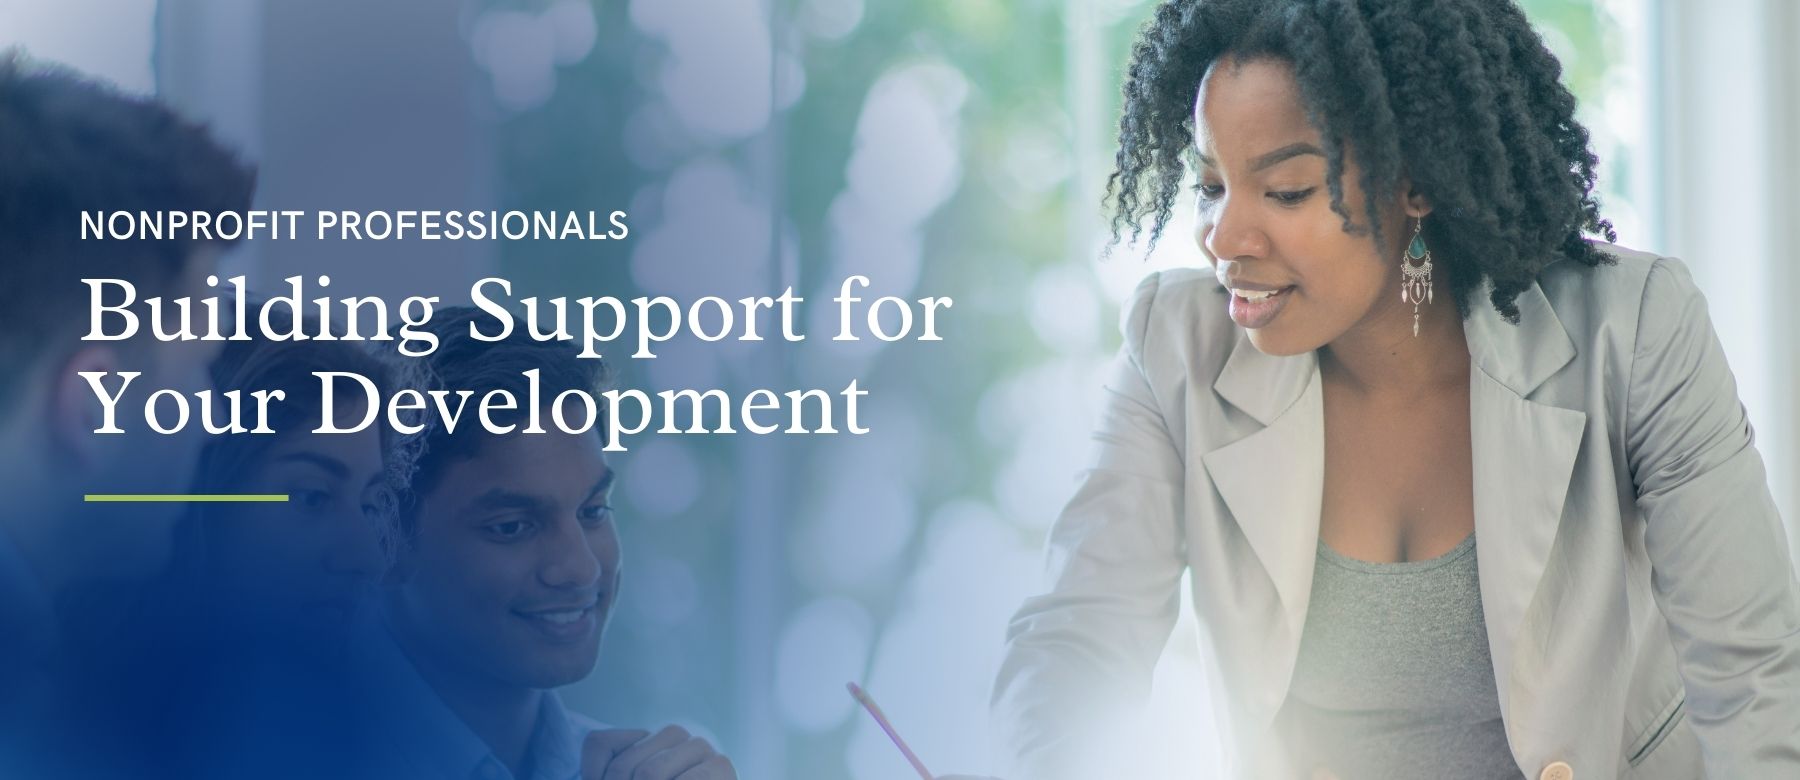 Text is "building support for your professional development" with female in a blazer presenting at a larger meeting